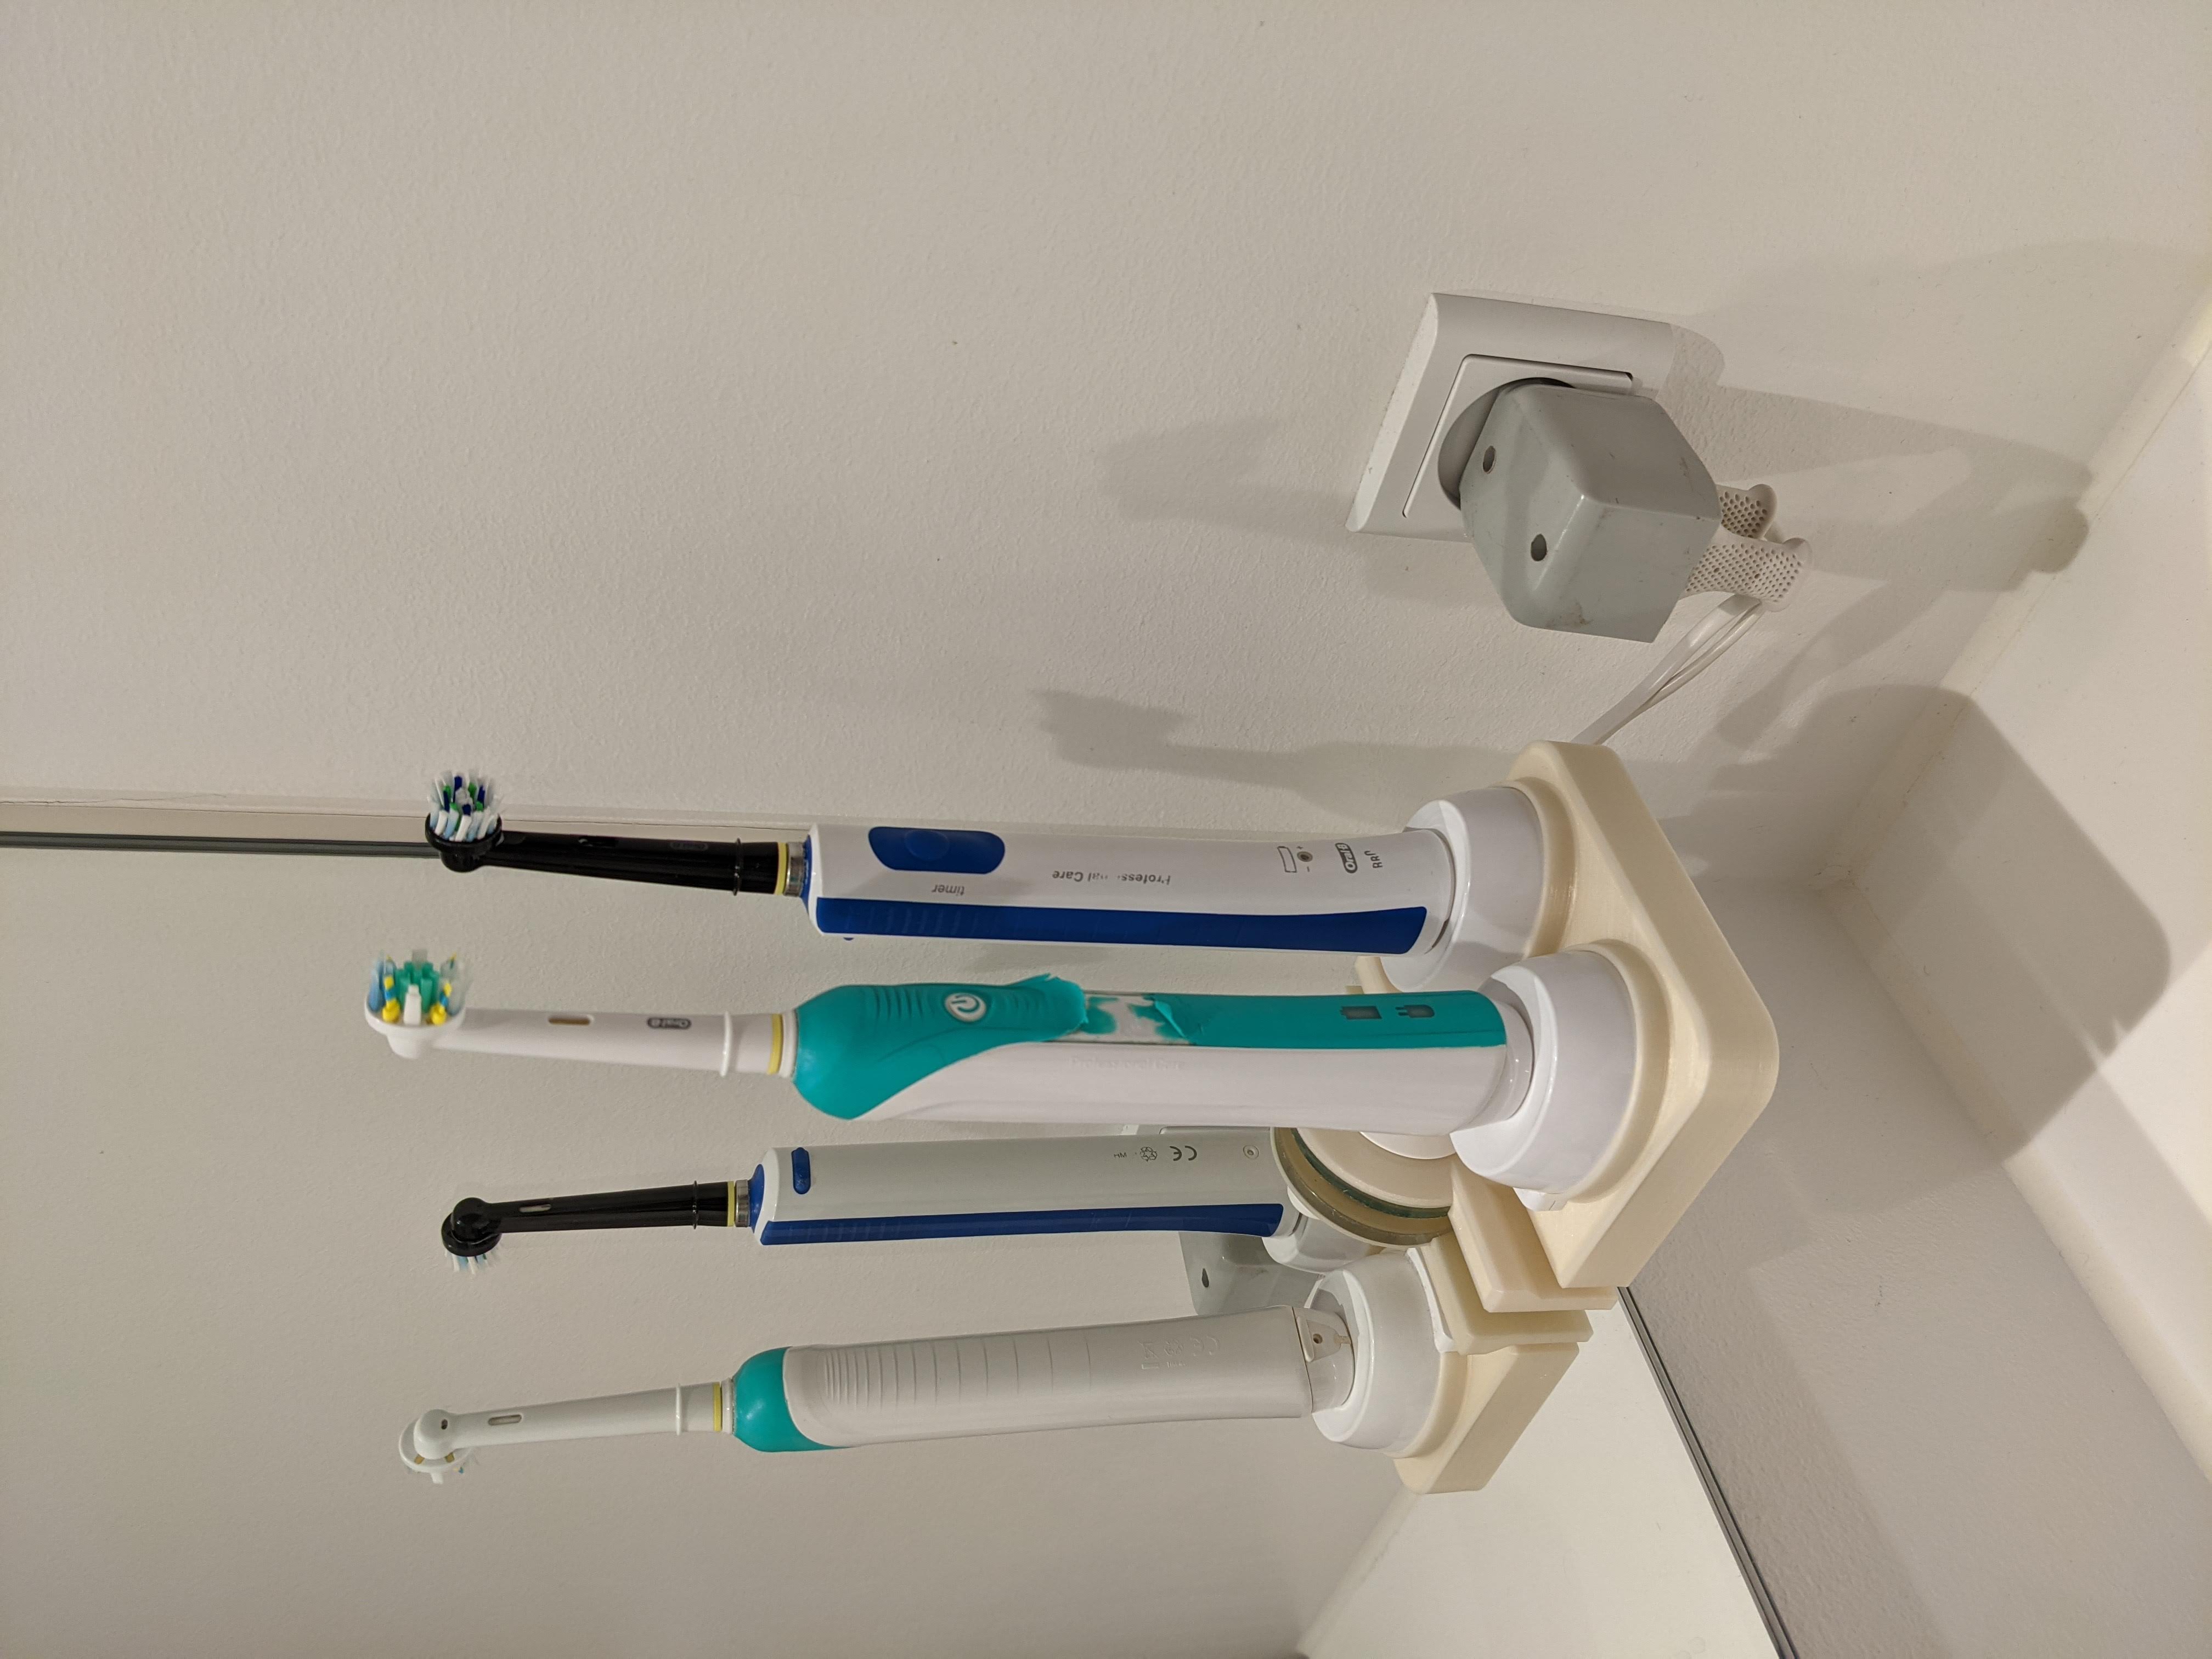 oral-b electric toothbrush double charger holder - suction cup